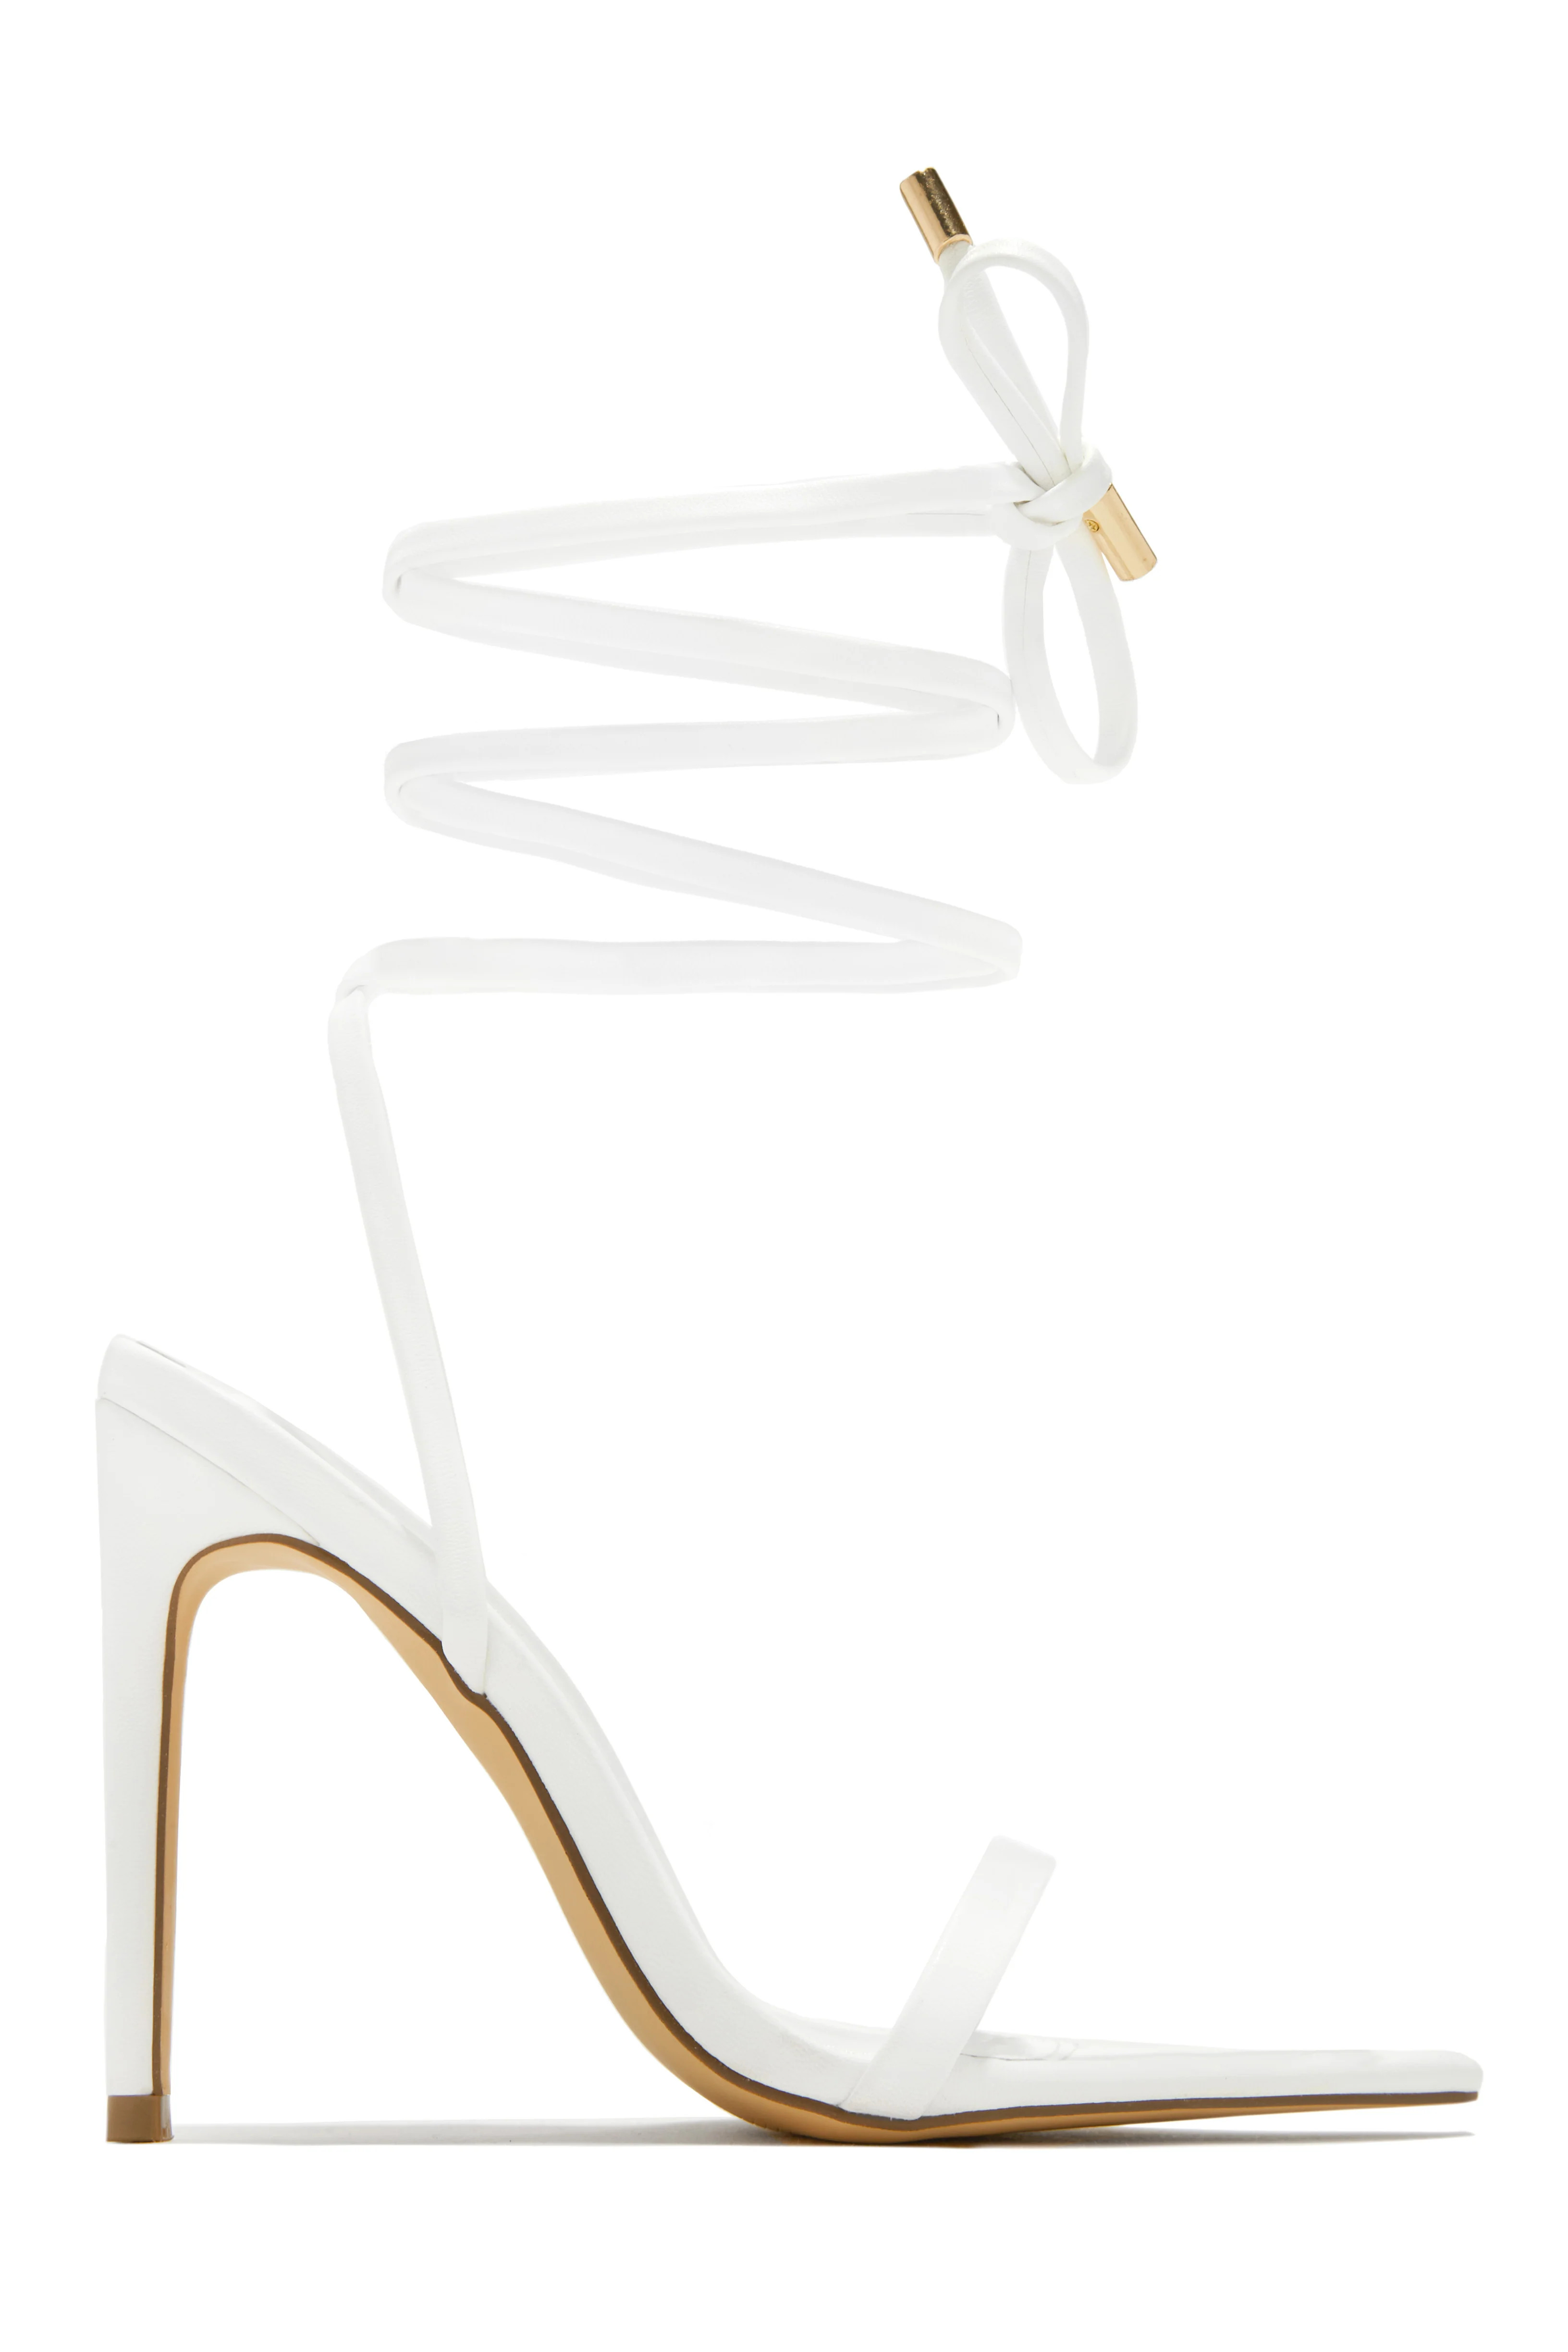 Miss Lola | Into The Night White Lace Up High Heels | MISS LOLA